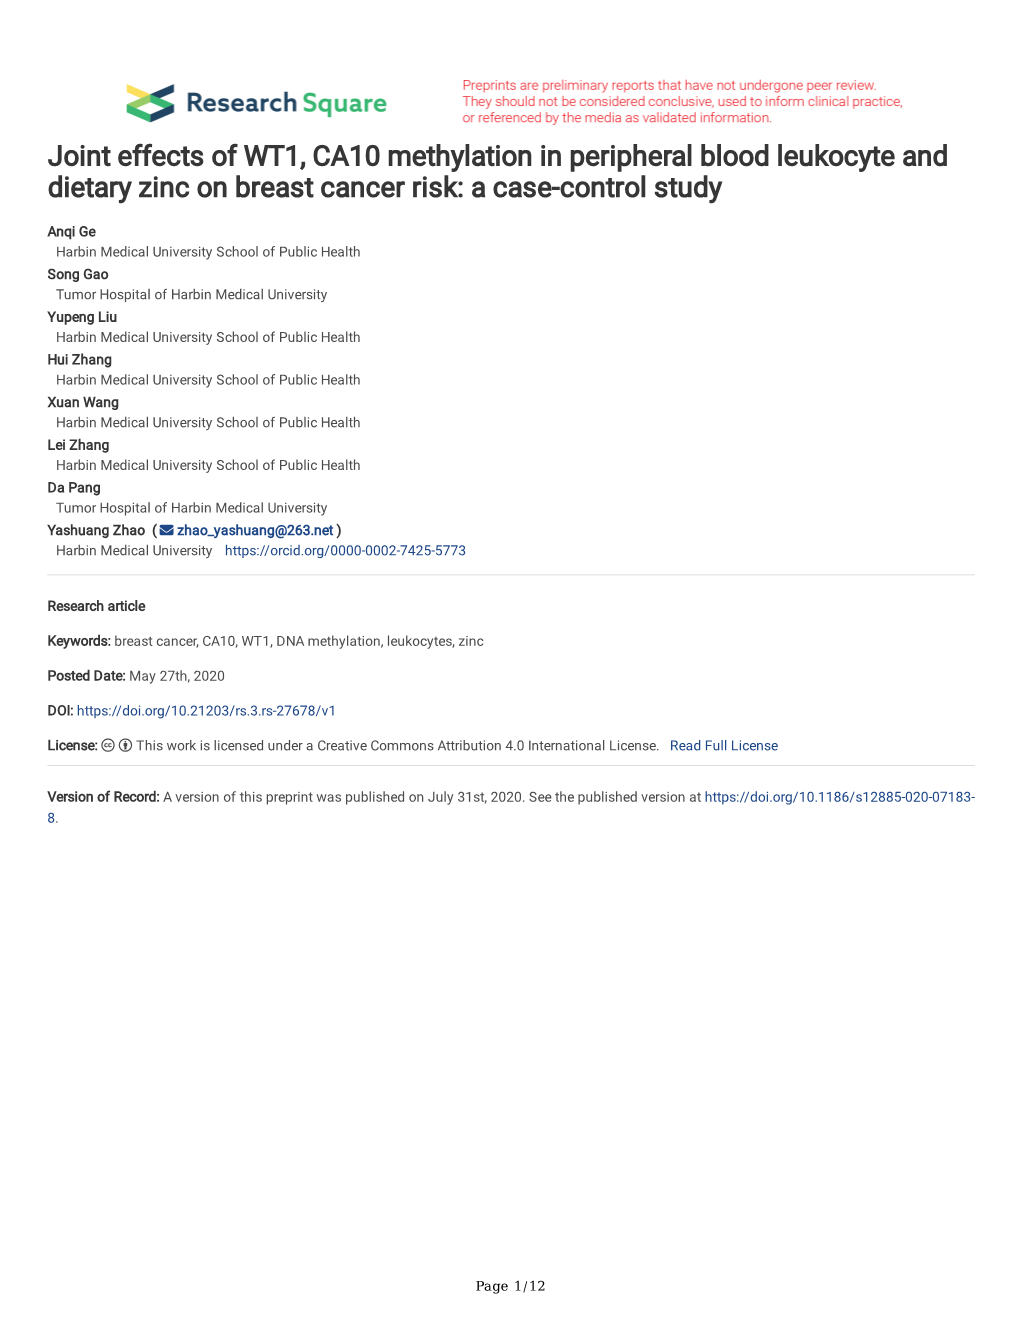 Joint Effects of WT1, CA10 Methylation in Peripheral Blood Leukocyte and Dietary Zinc on Breast Cancer Risk: a Case-Control Study